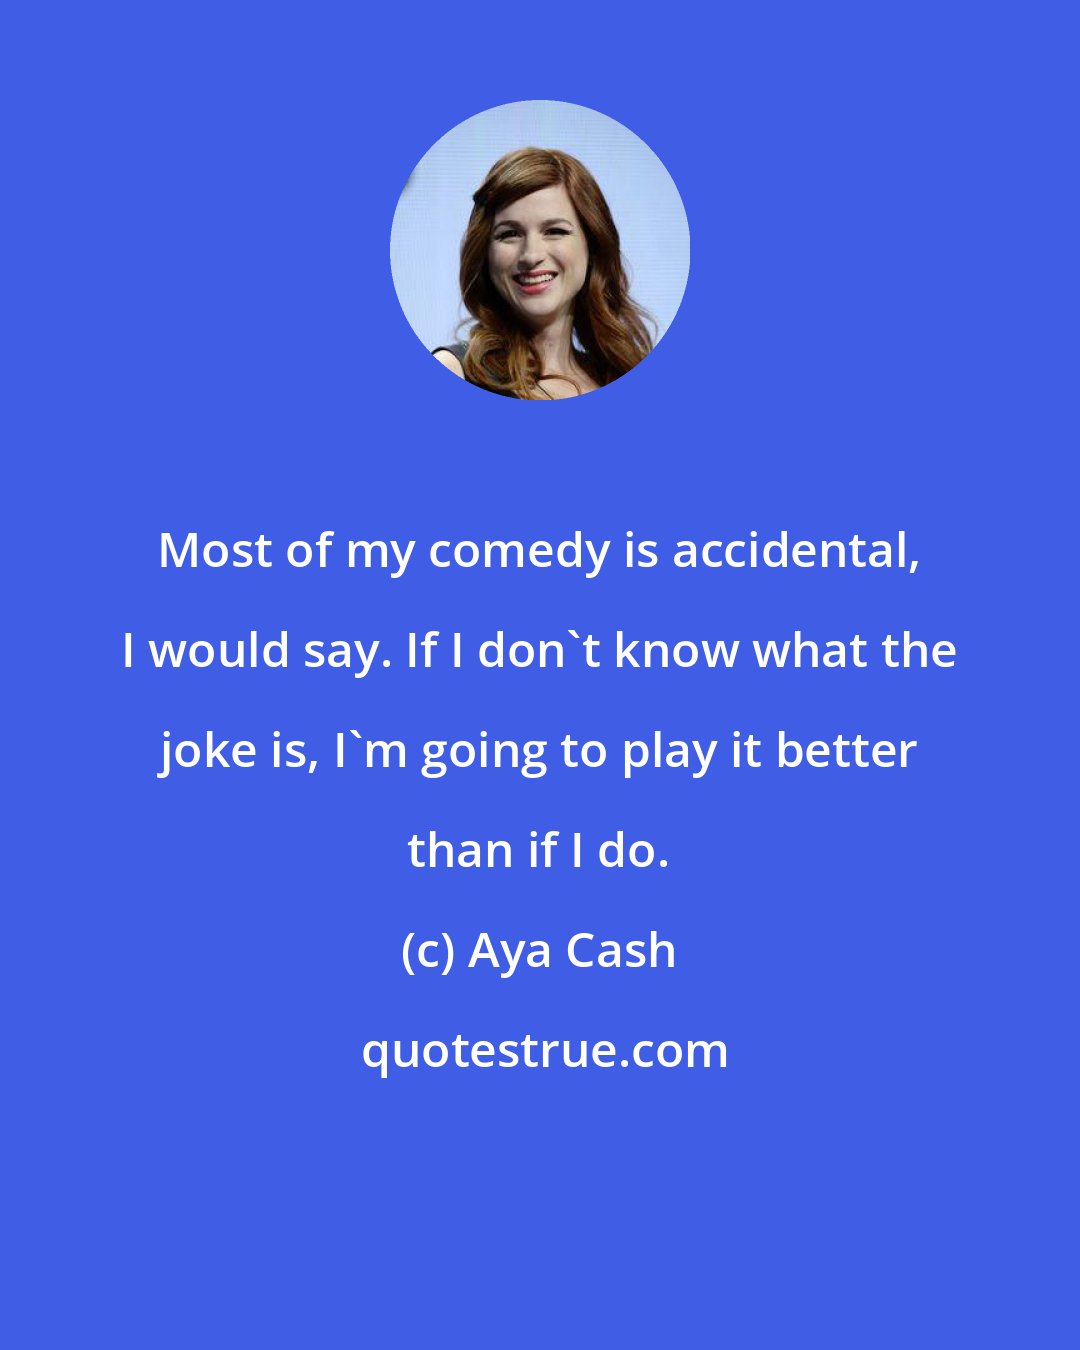 Aya Cash: Most of my comedy is accidental, I would say. If I don't know what the joke is, I'm going to play it better than if I do.